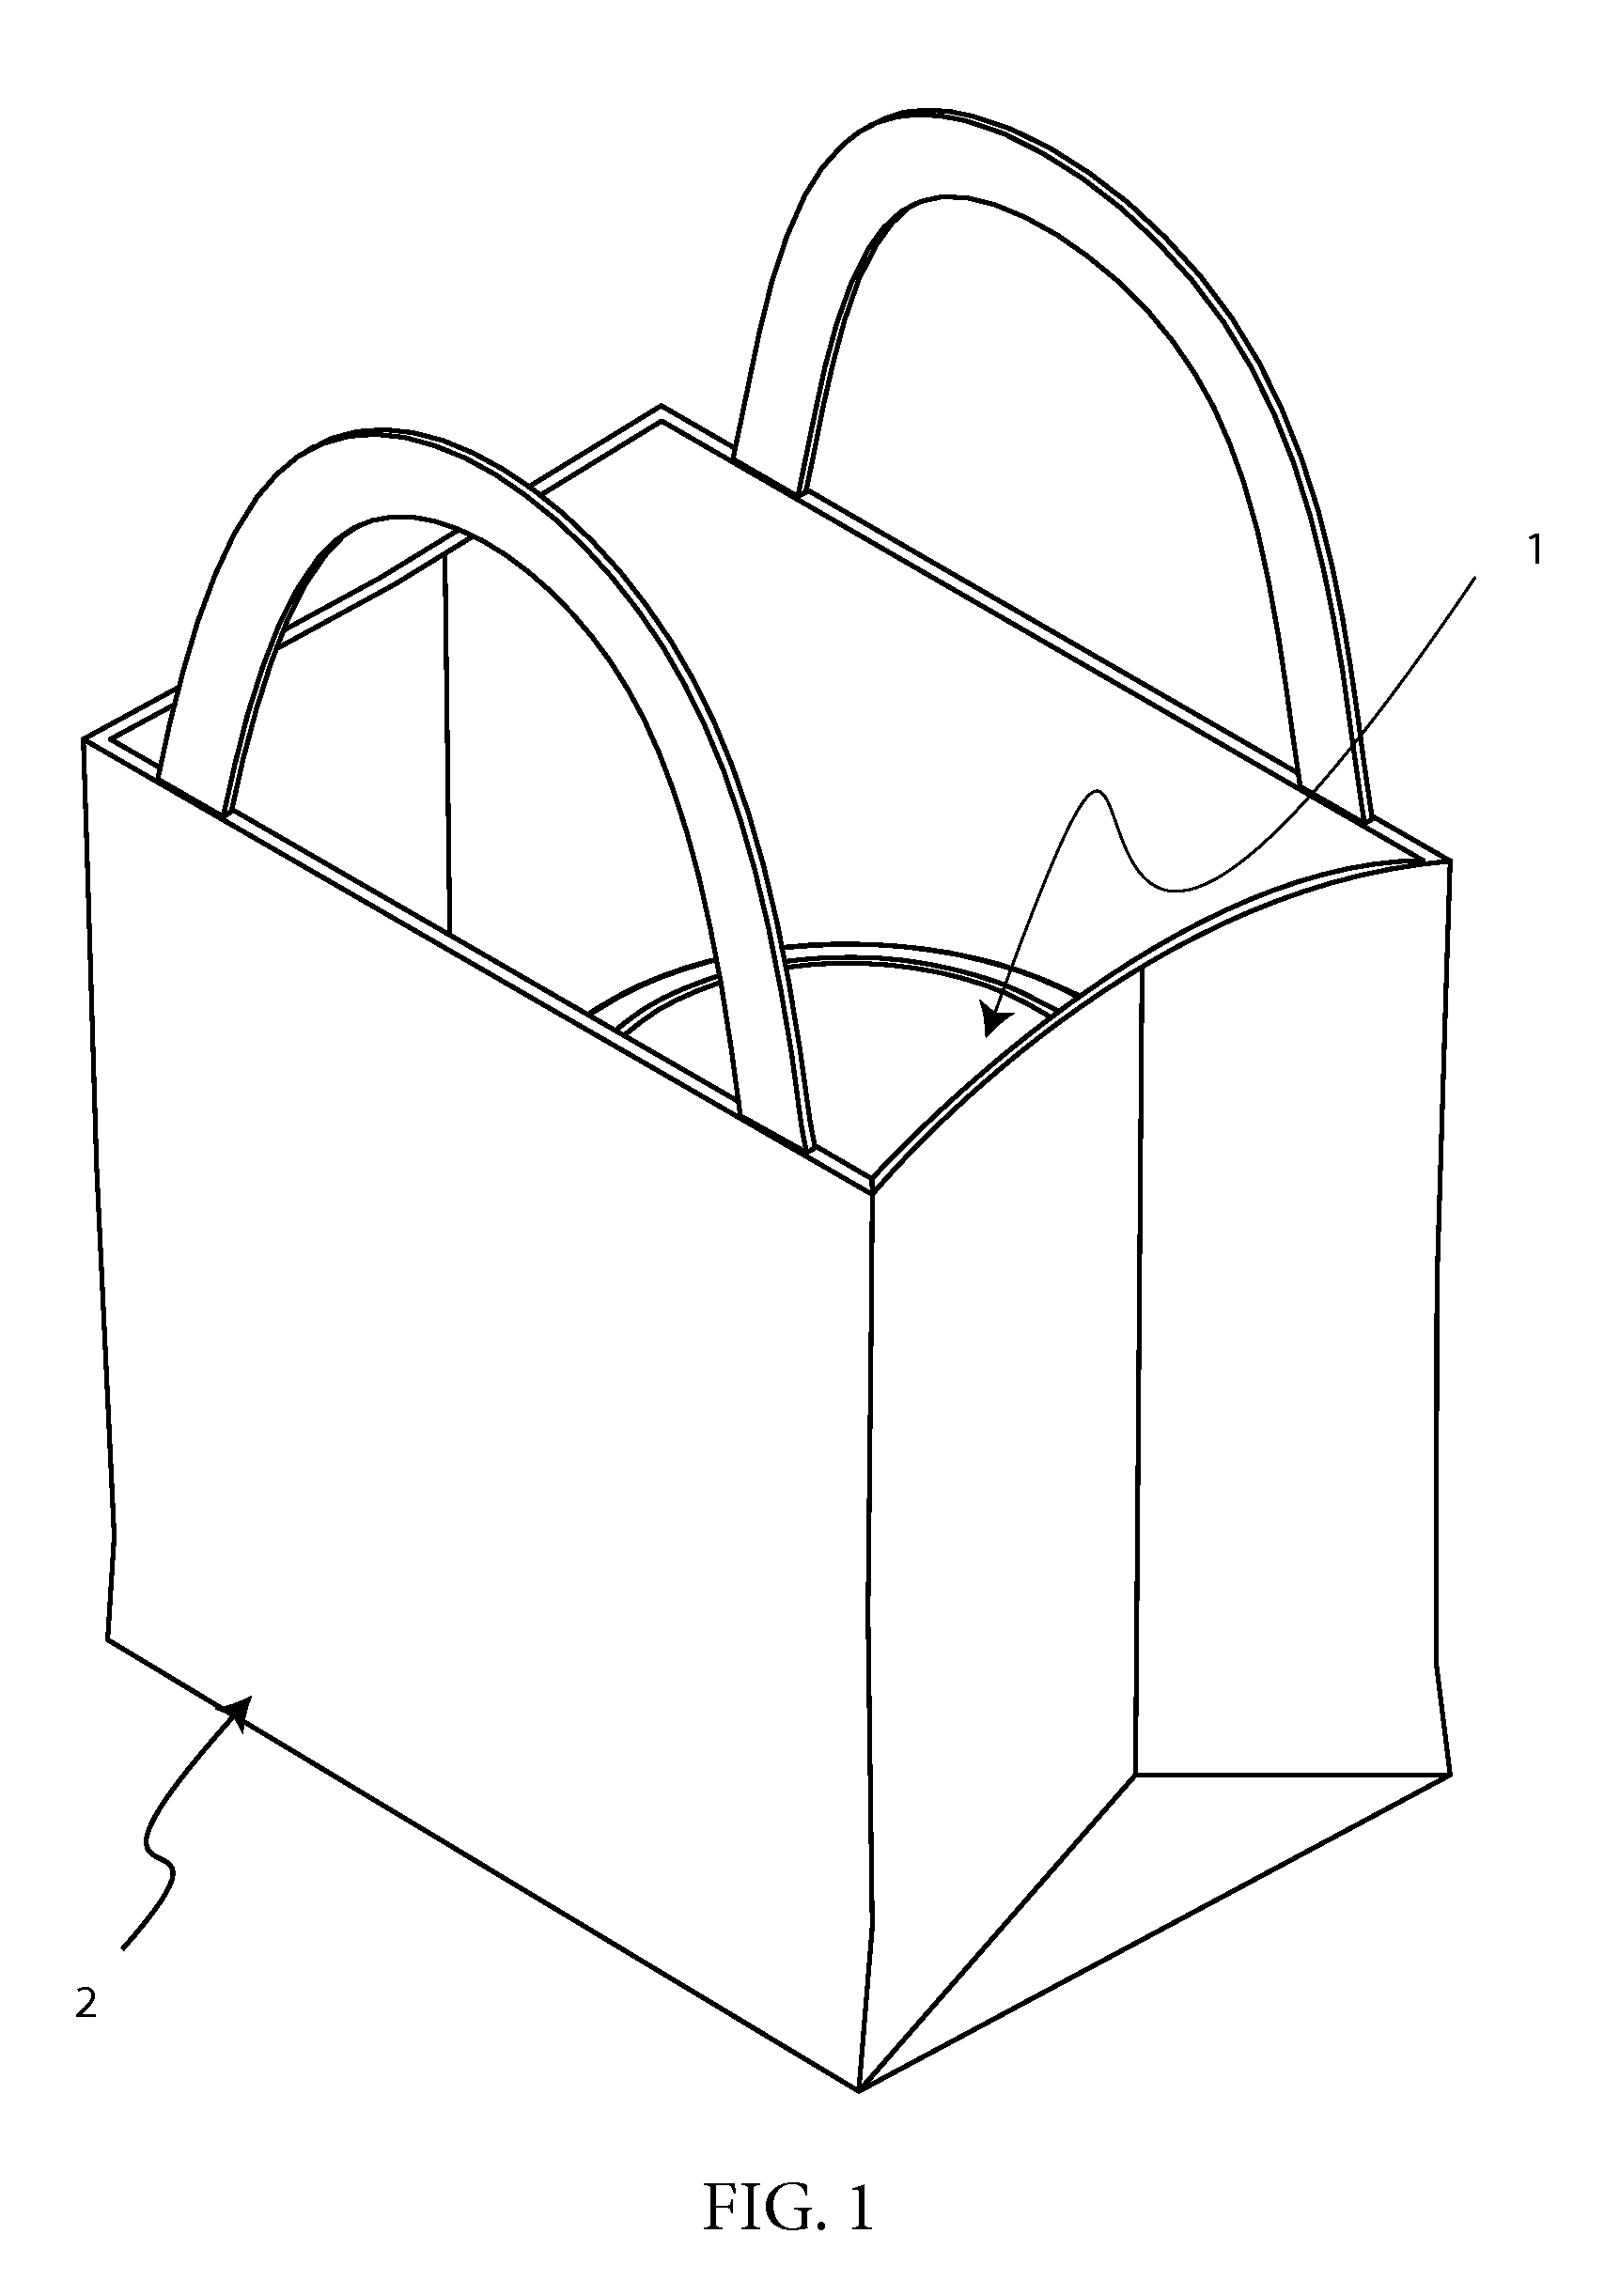 Method and Apparatus for Containing Leftover Foods